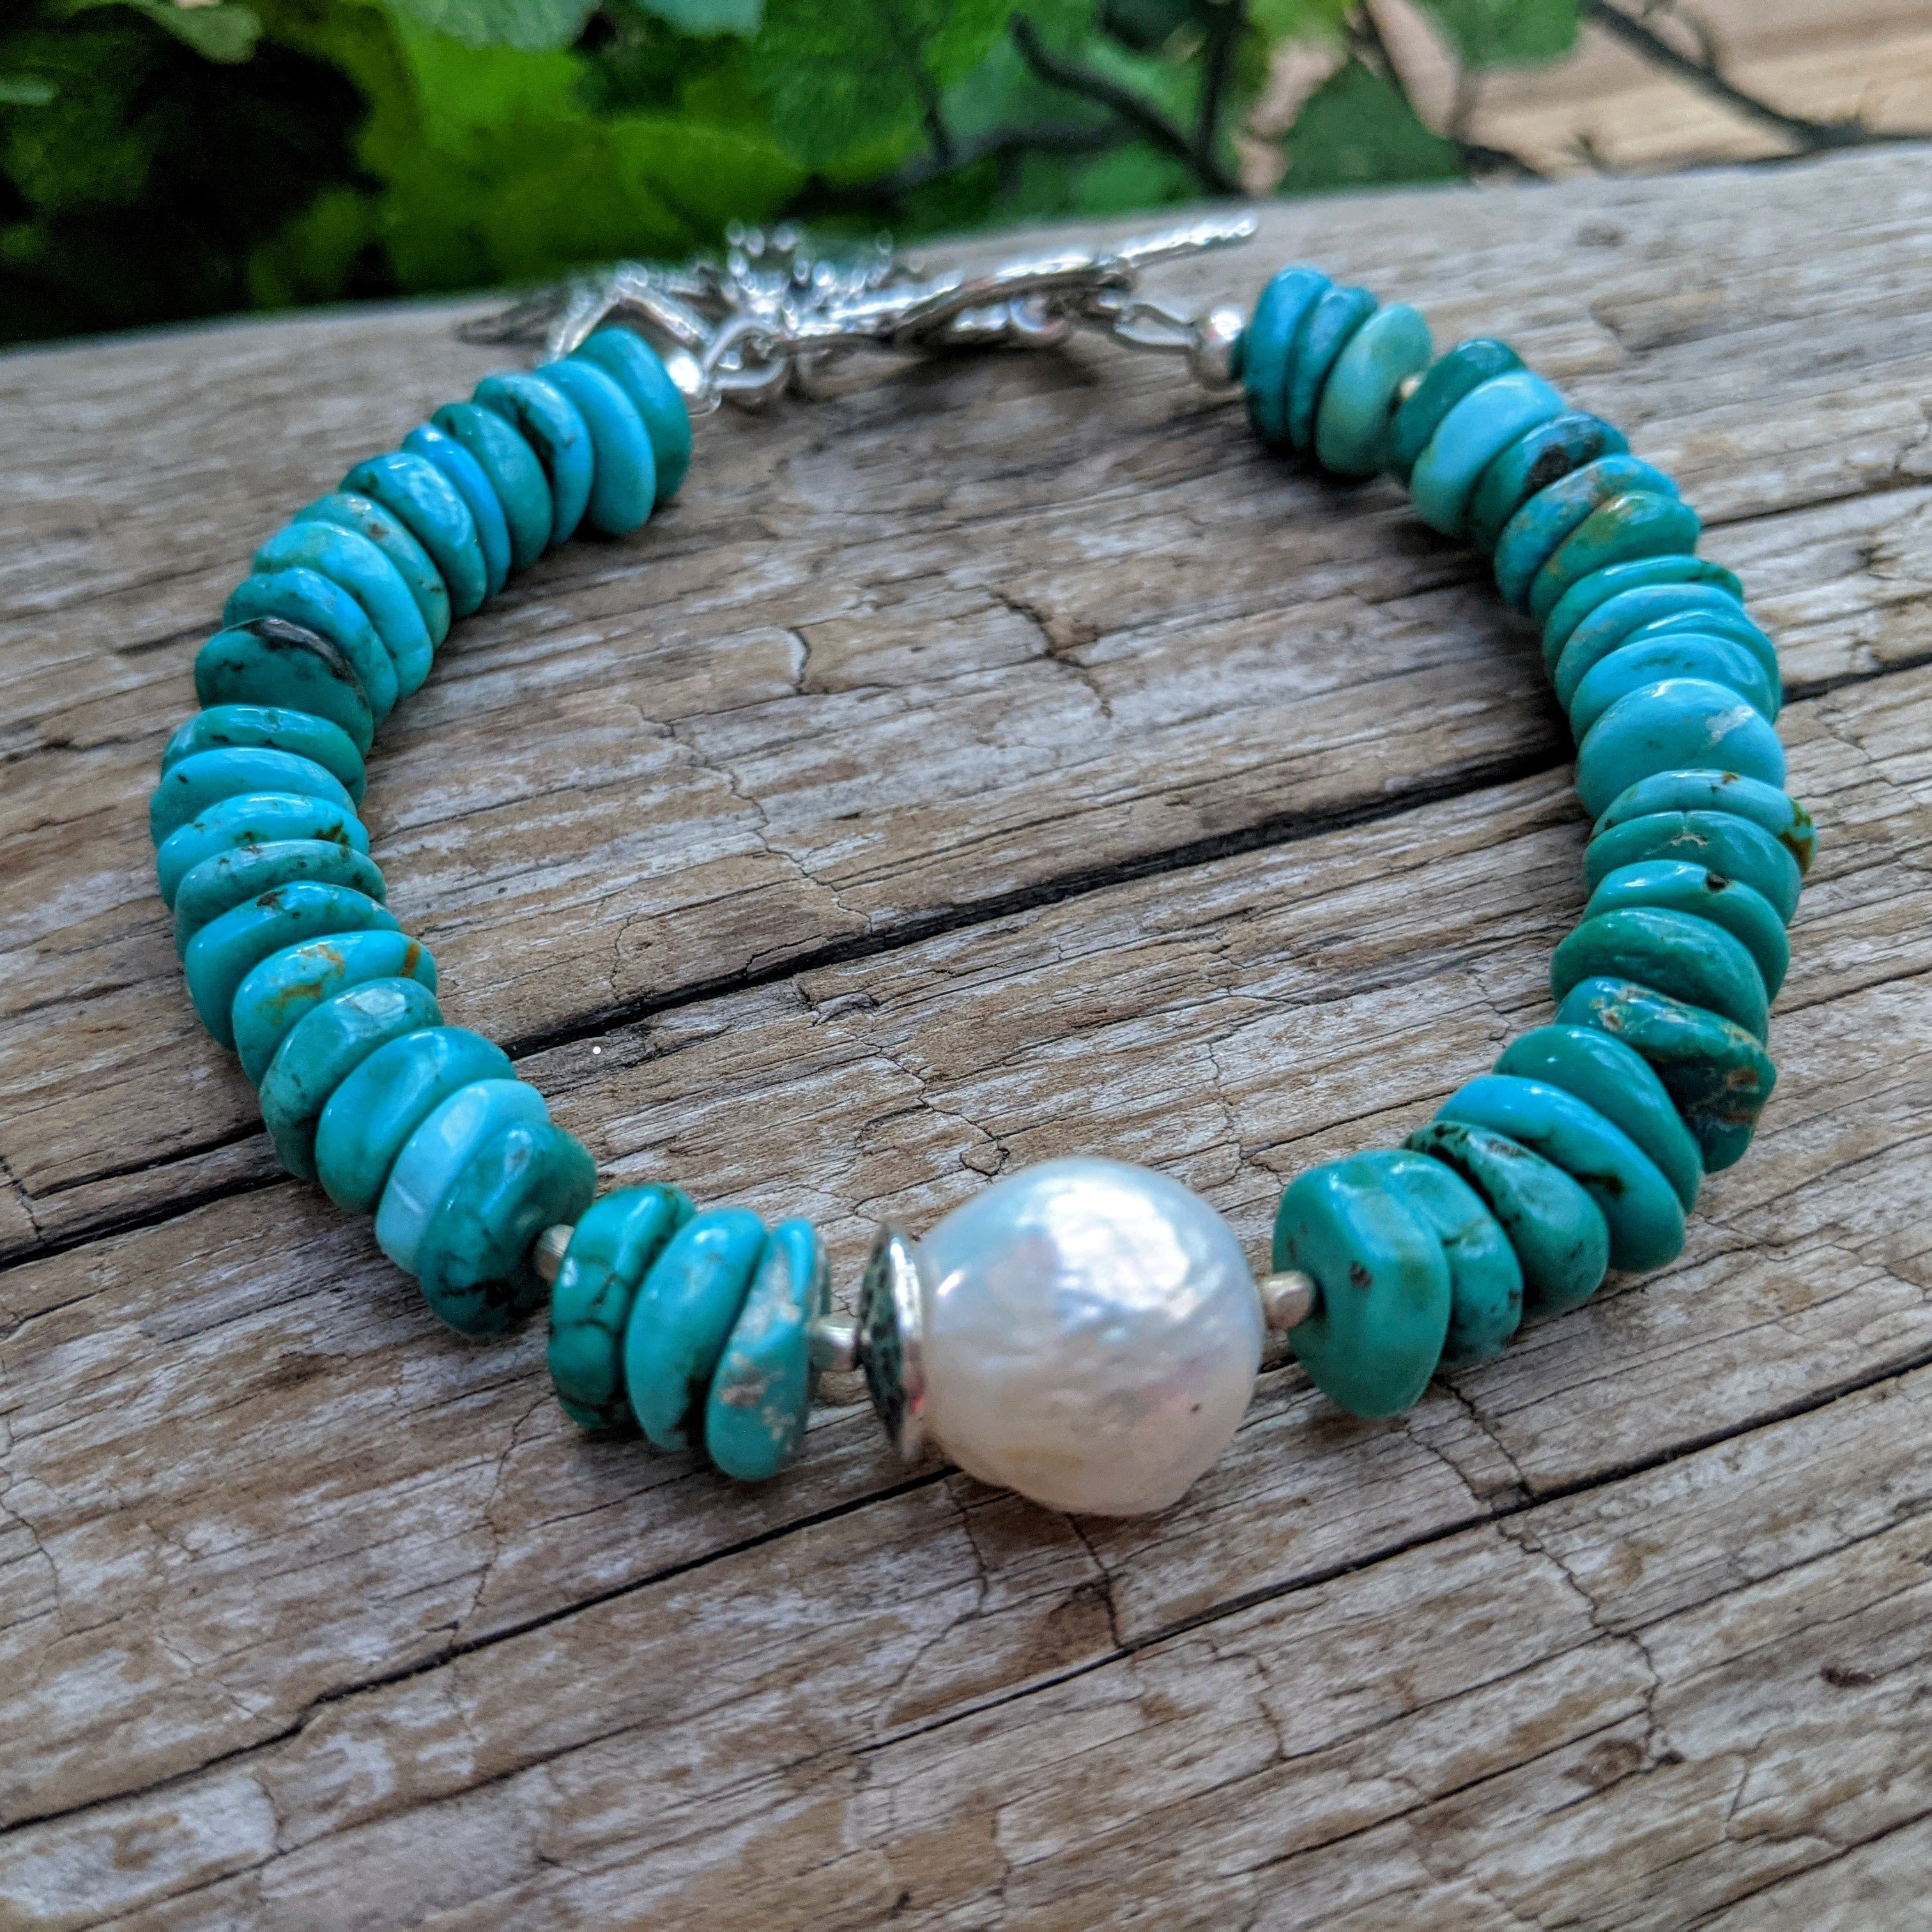 Turquoise & pearl ocean theme bracelet. Seahorse & sea star charm bracelet. Gemstone charm bracelet. Unique artisan jewelry. Artistic jewelry. Handcrafted by Aurora Creative Jewellery. 